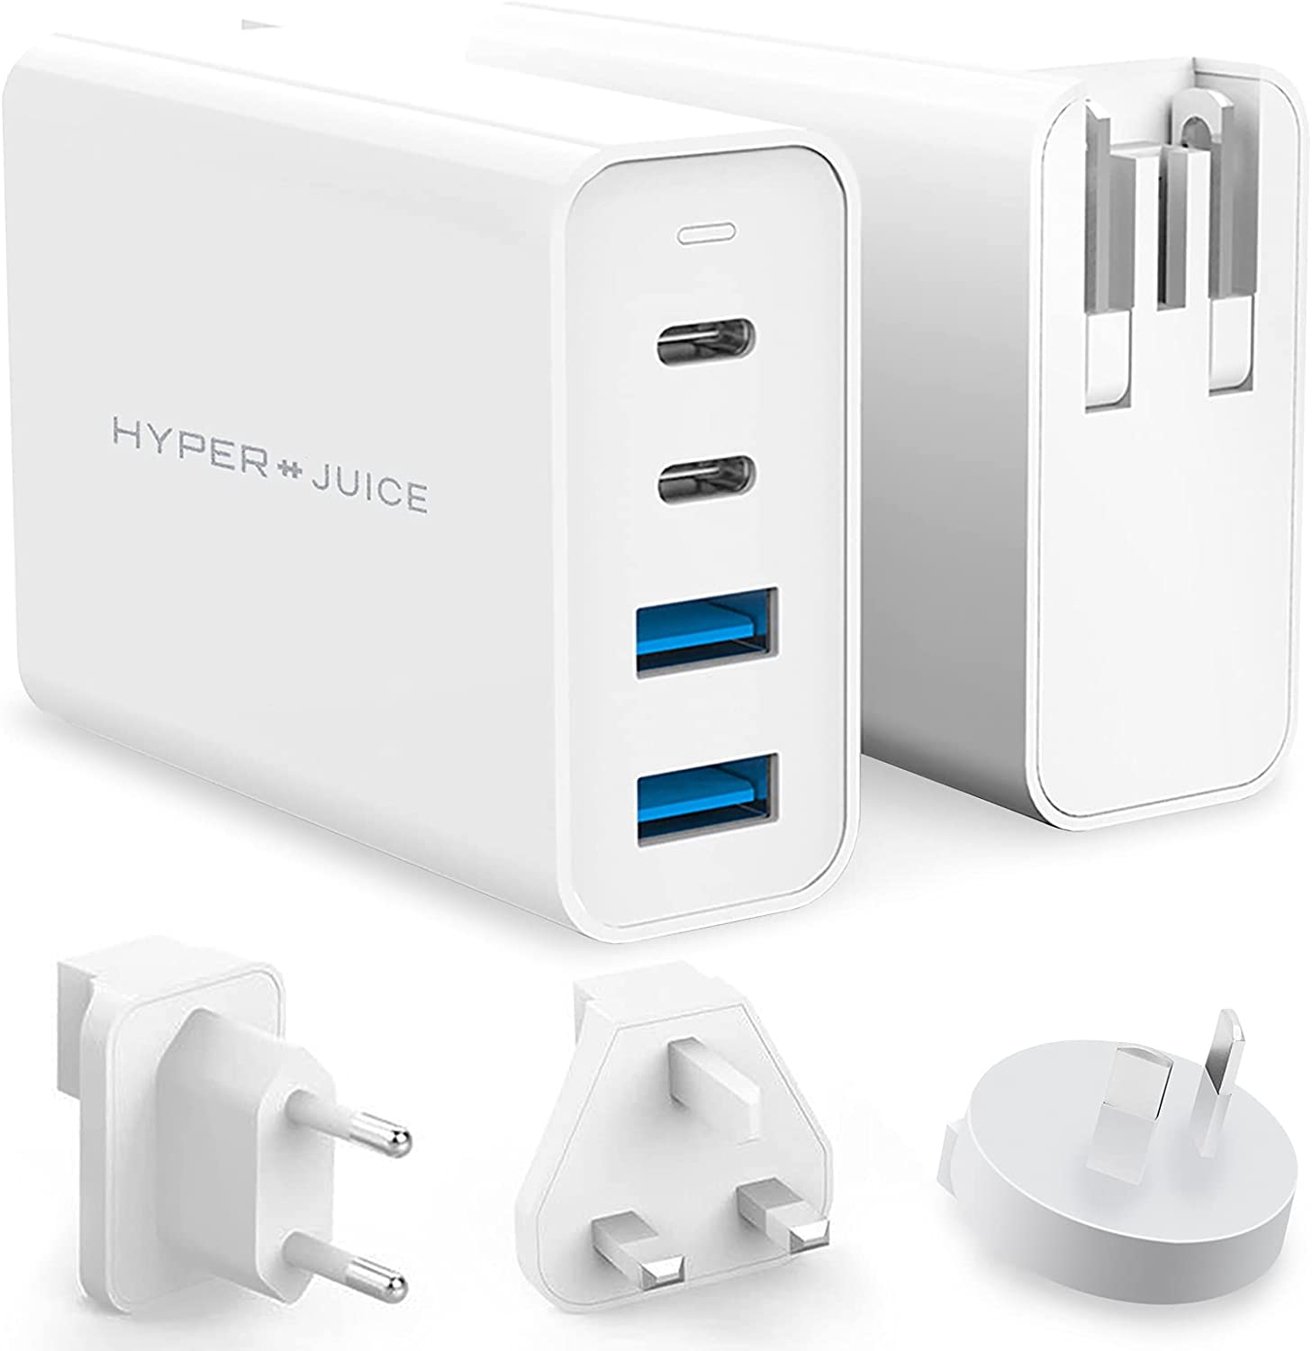 HyperJuice charger